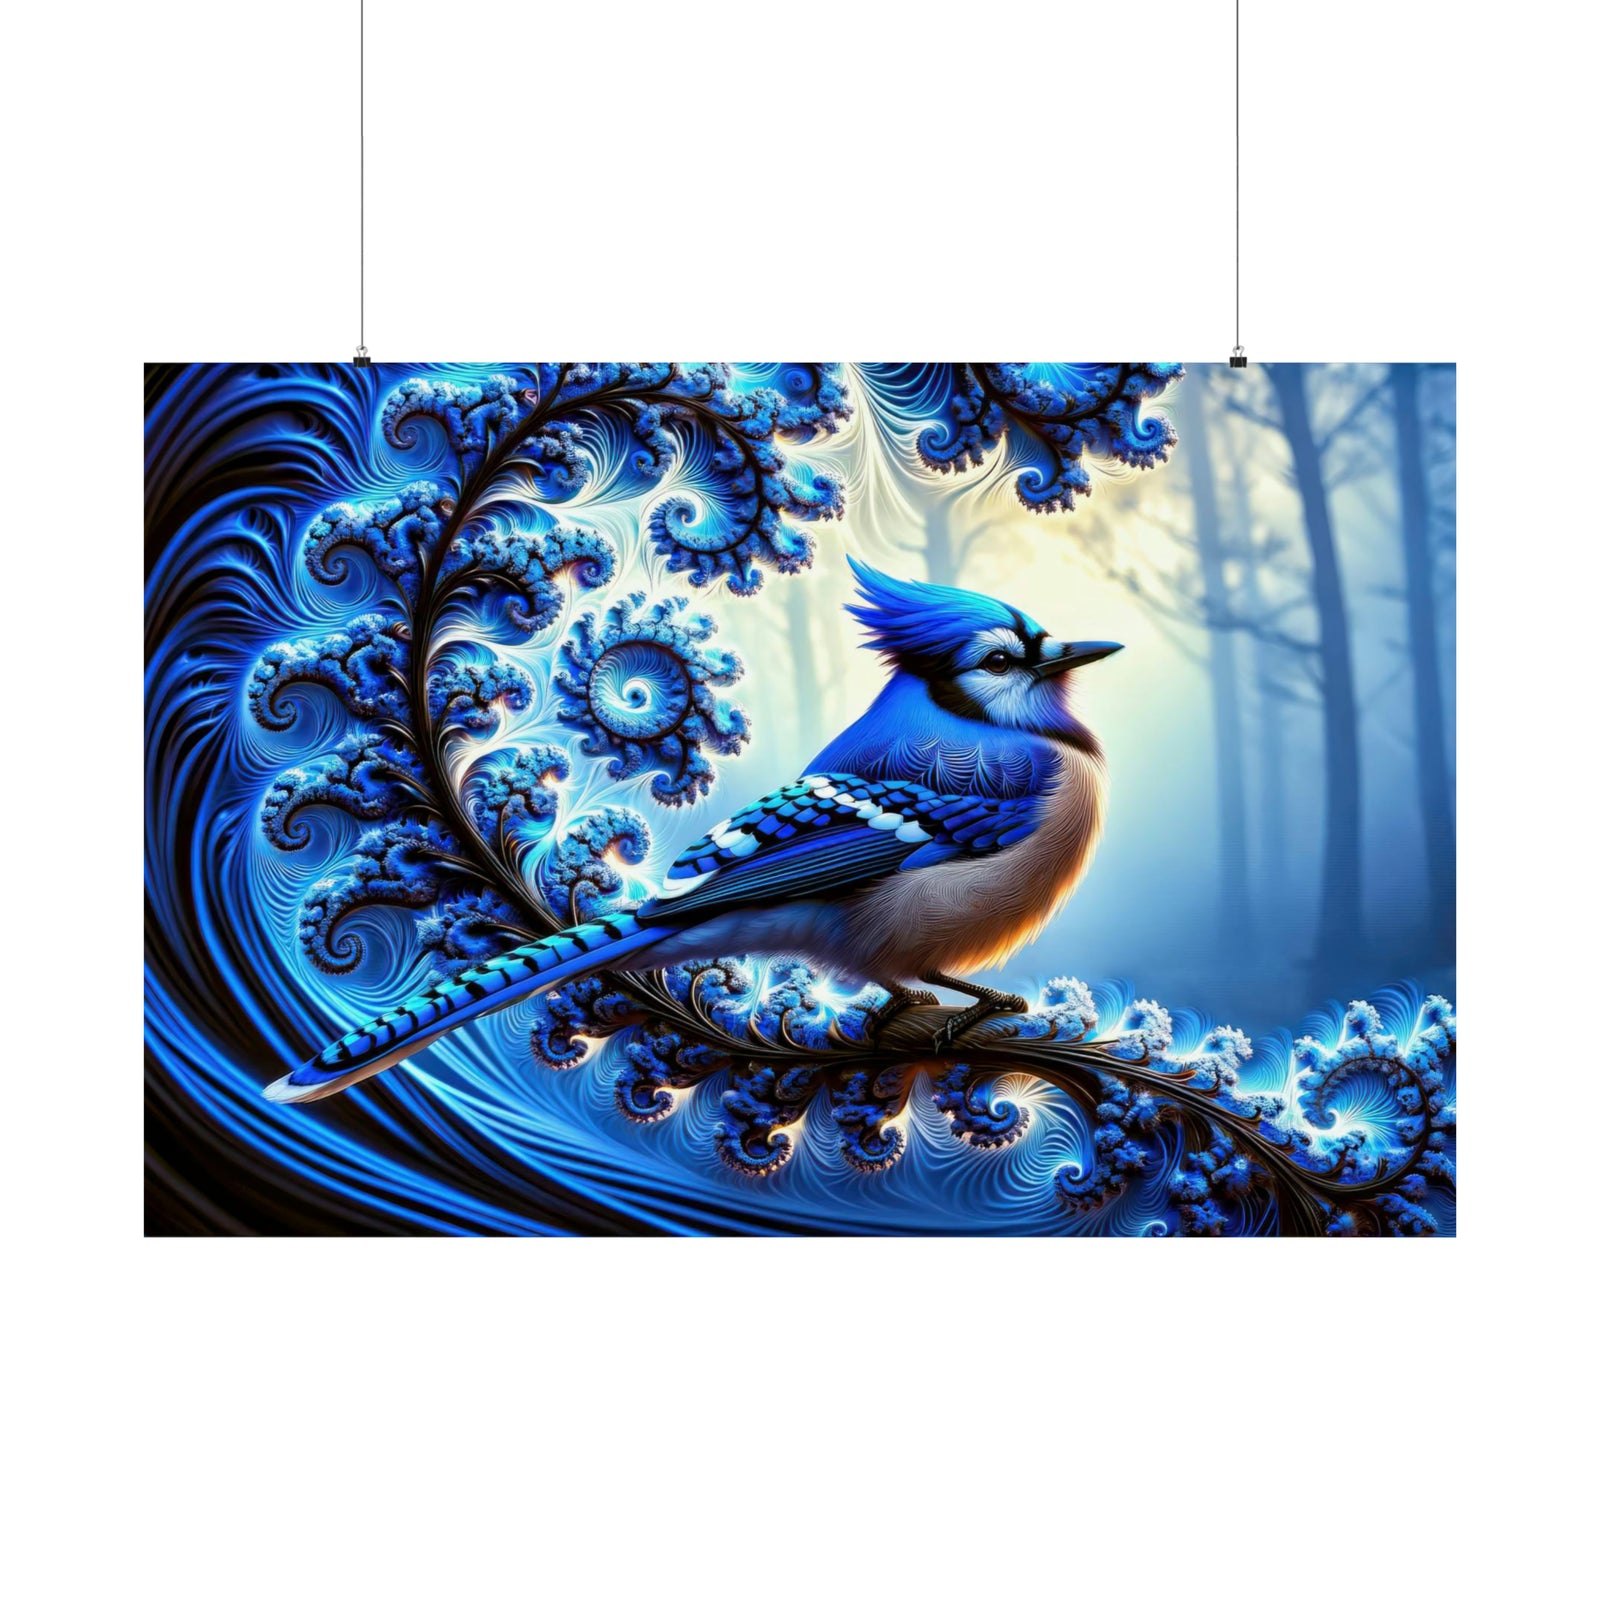 The Fractal Blue Jay's Enchanted Perch Poster